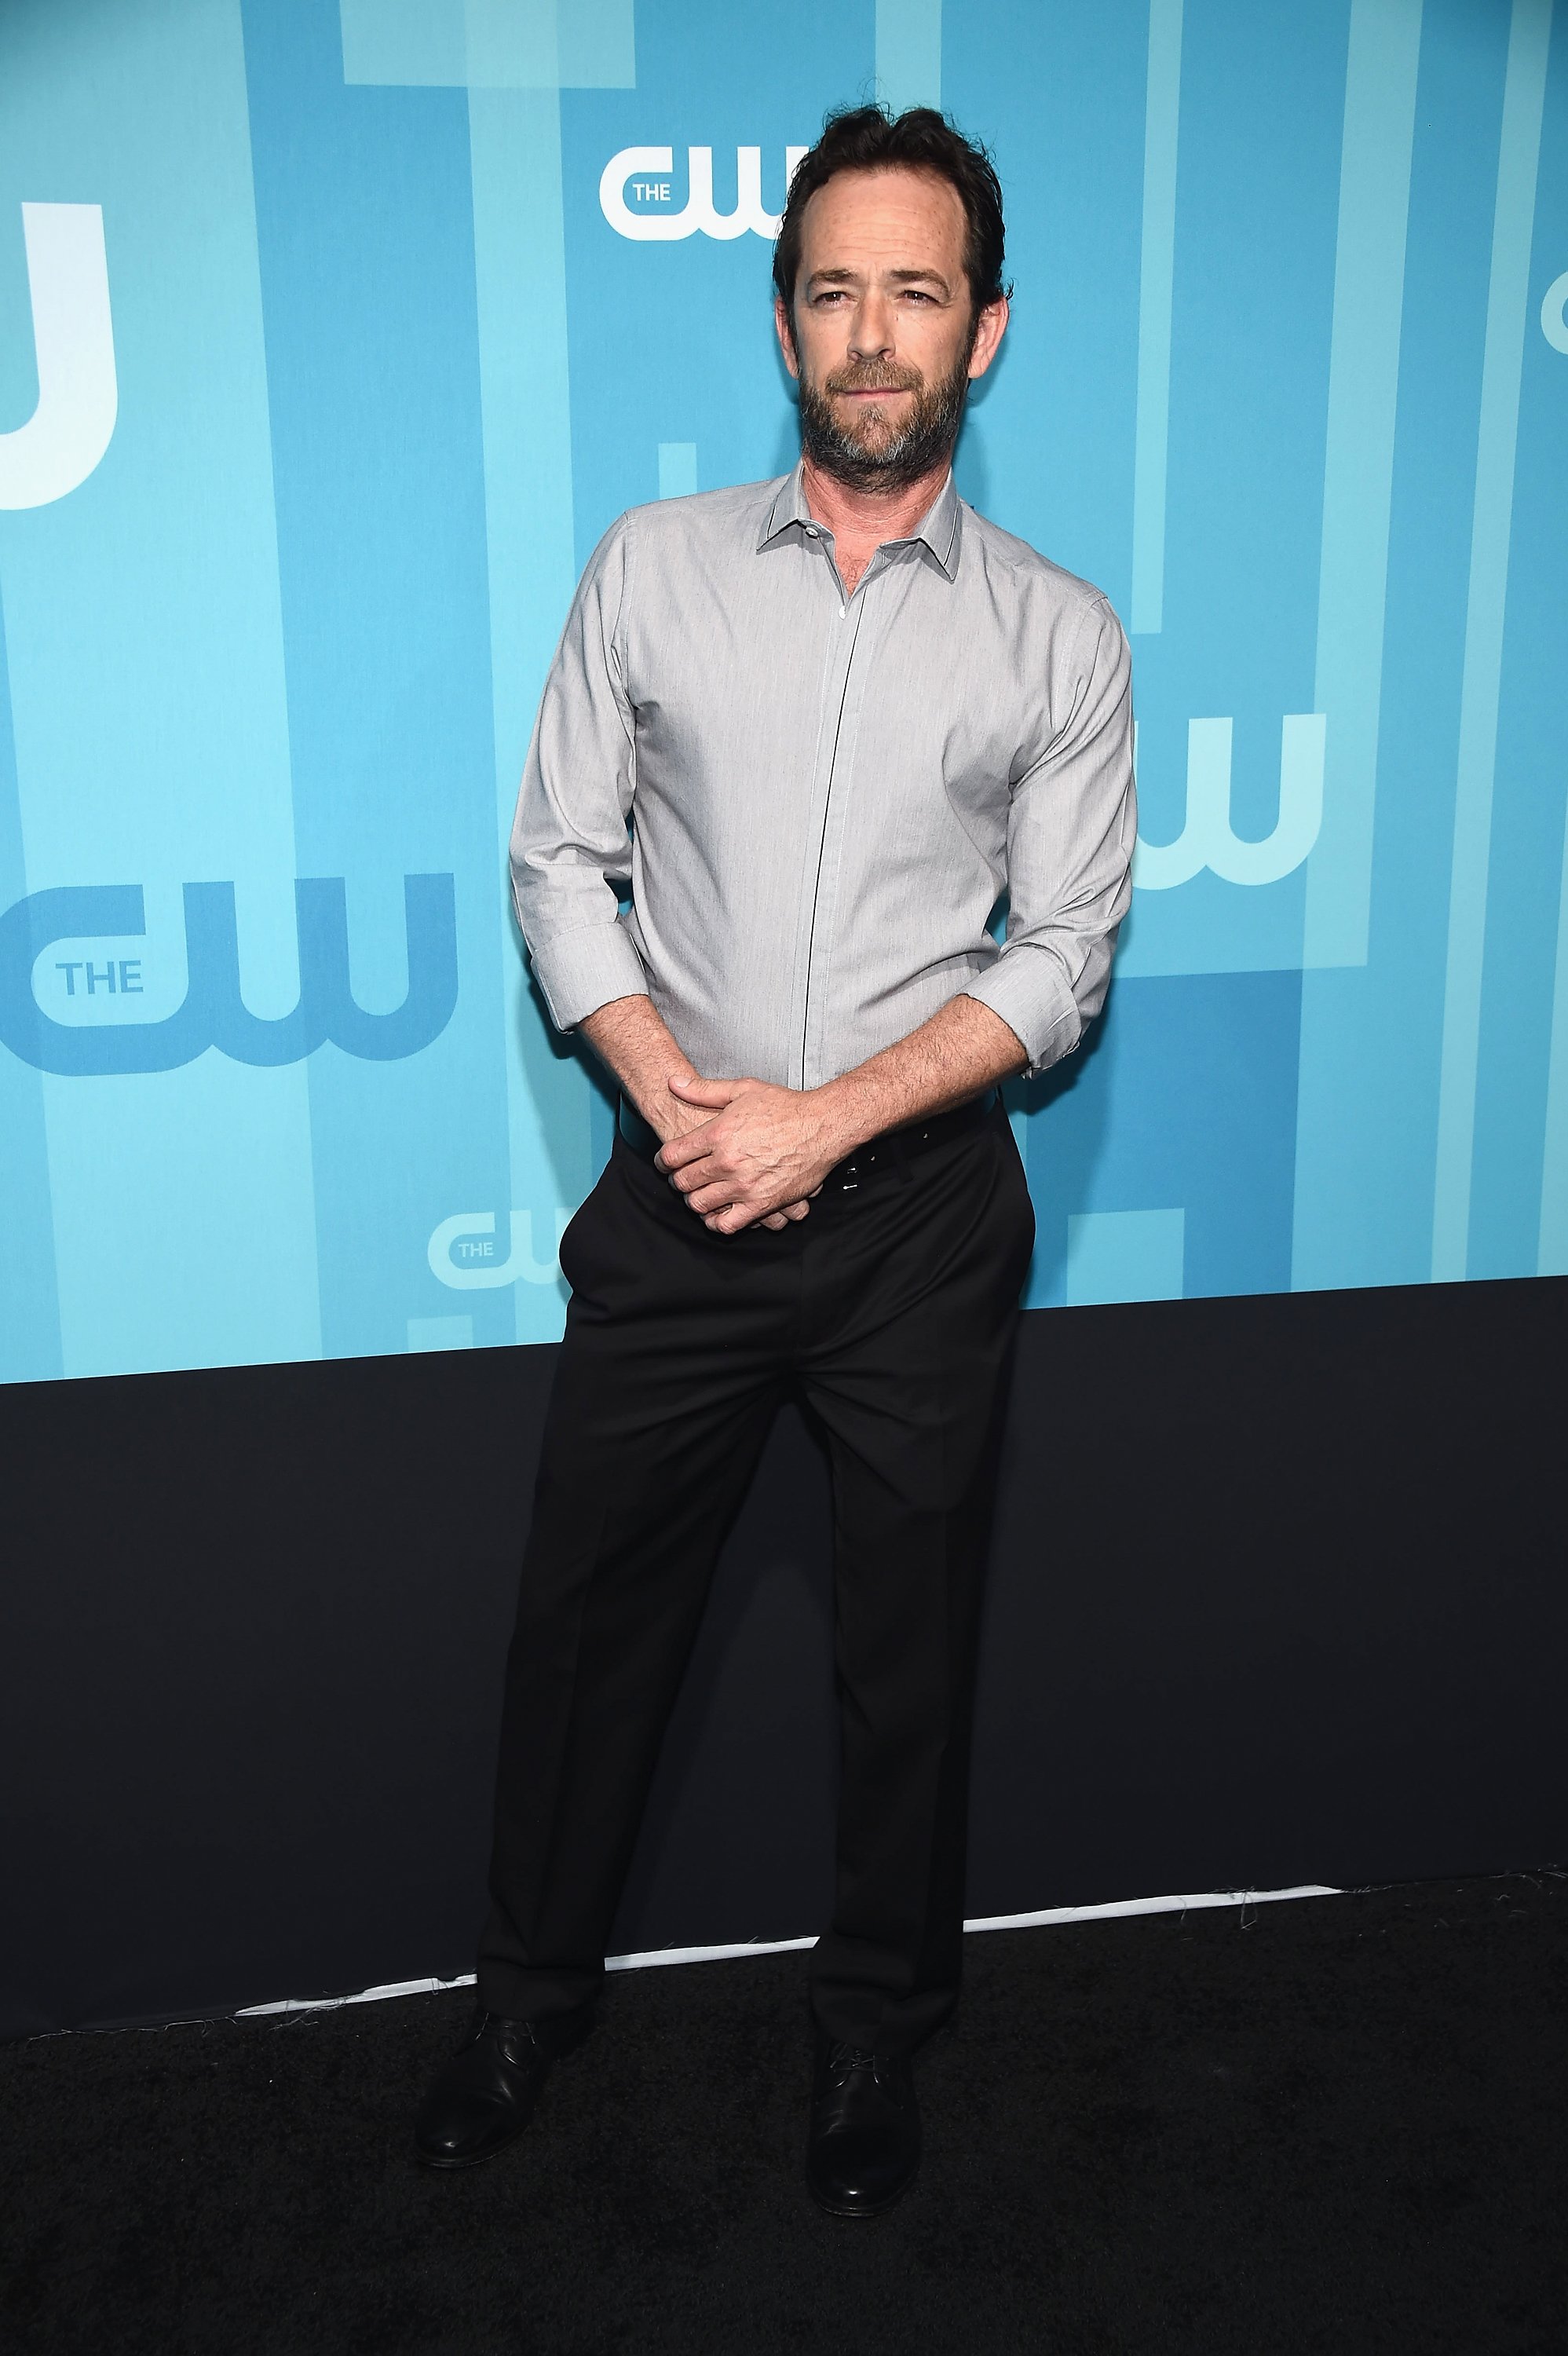 Luke Perry, late actor and former star of "Riverdale" | Photo: Getty Images